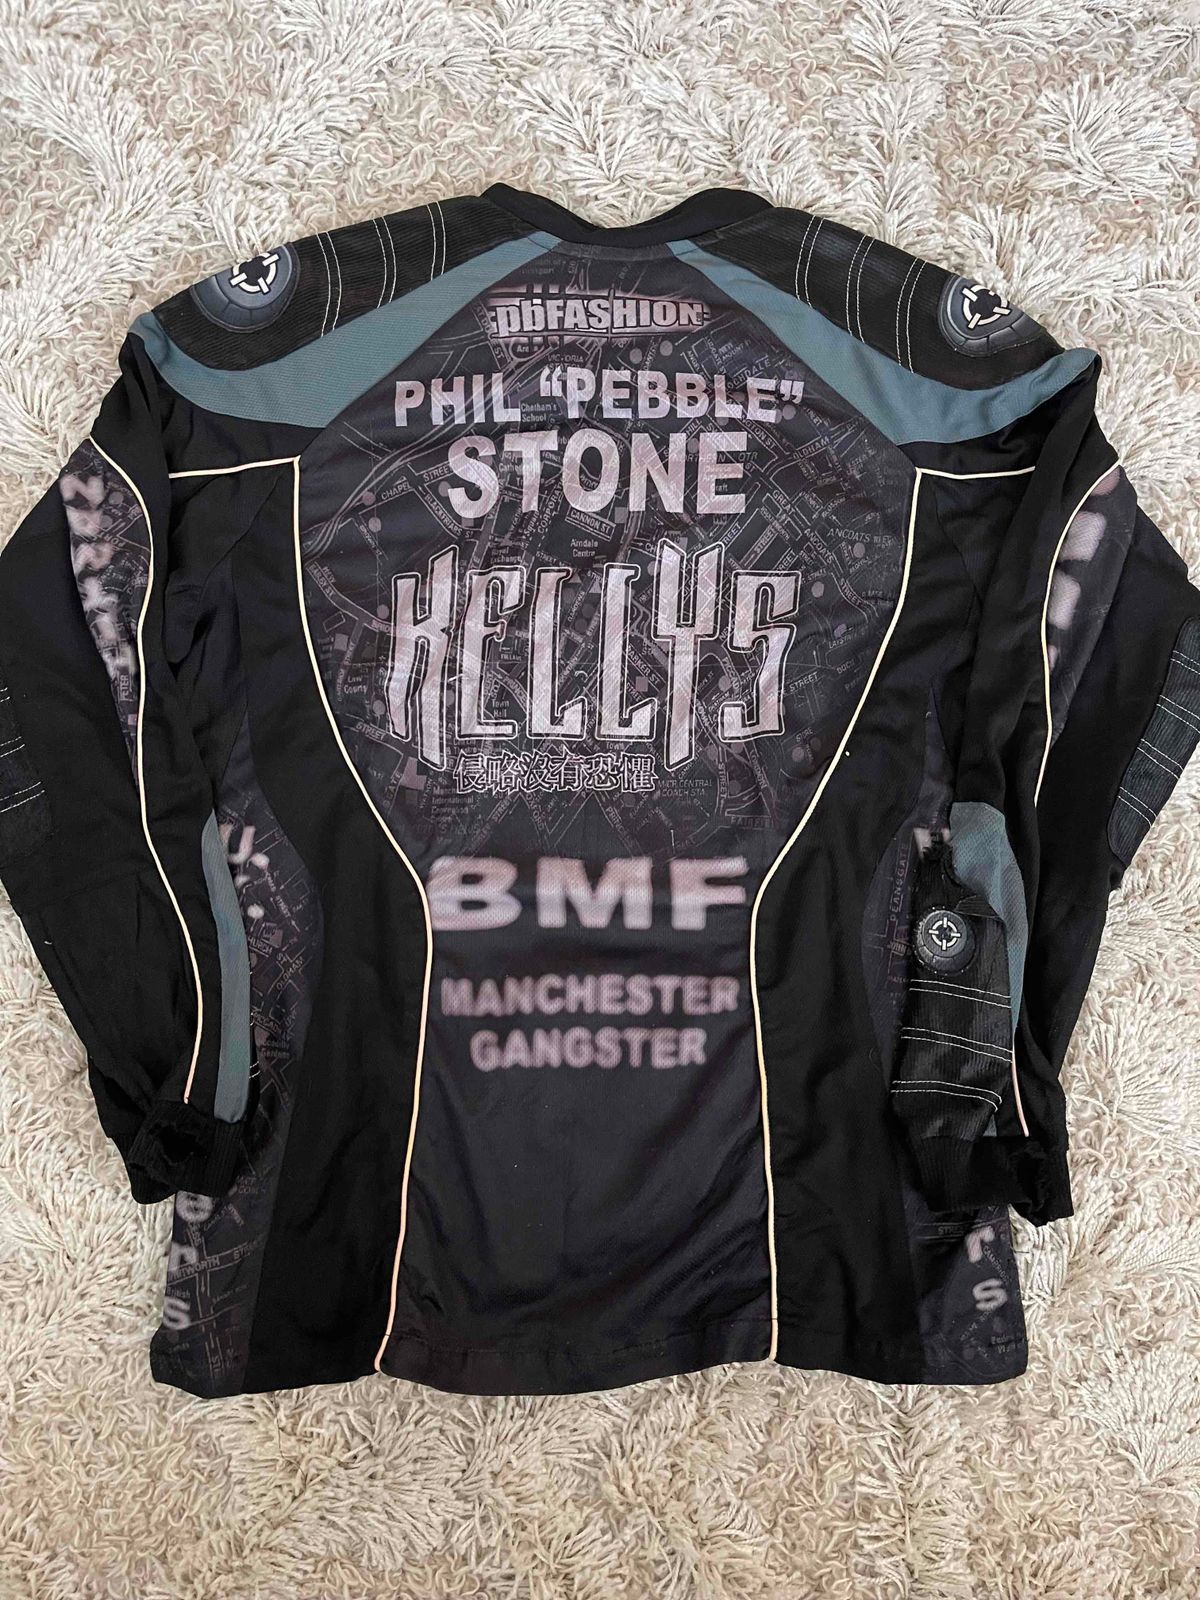 Phil Stone Kelly’s Jersey